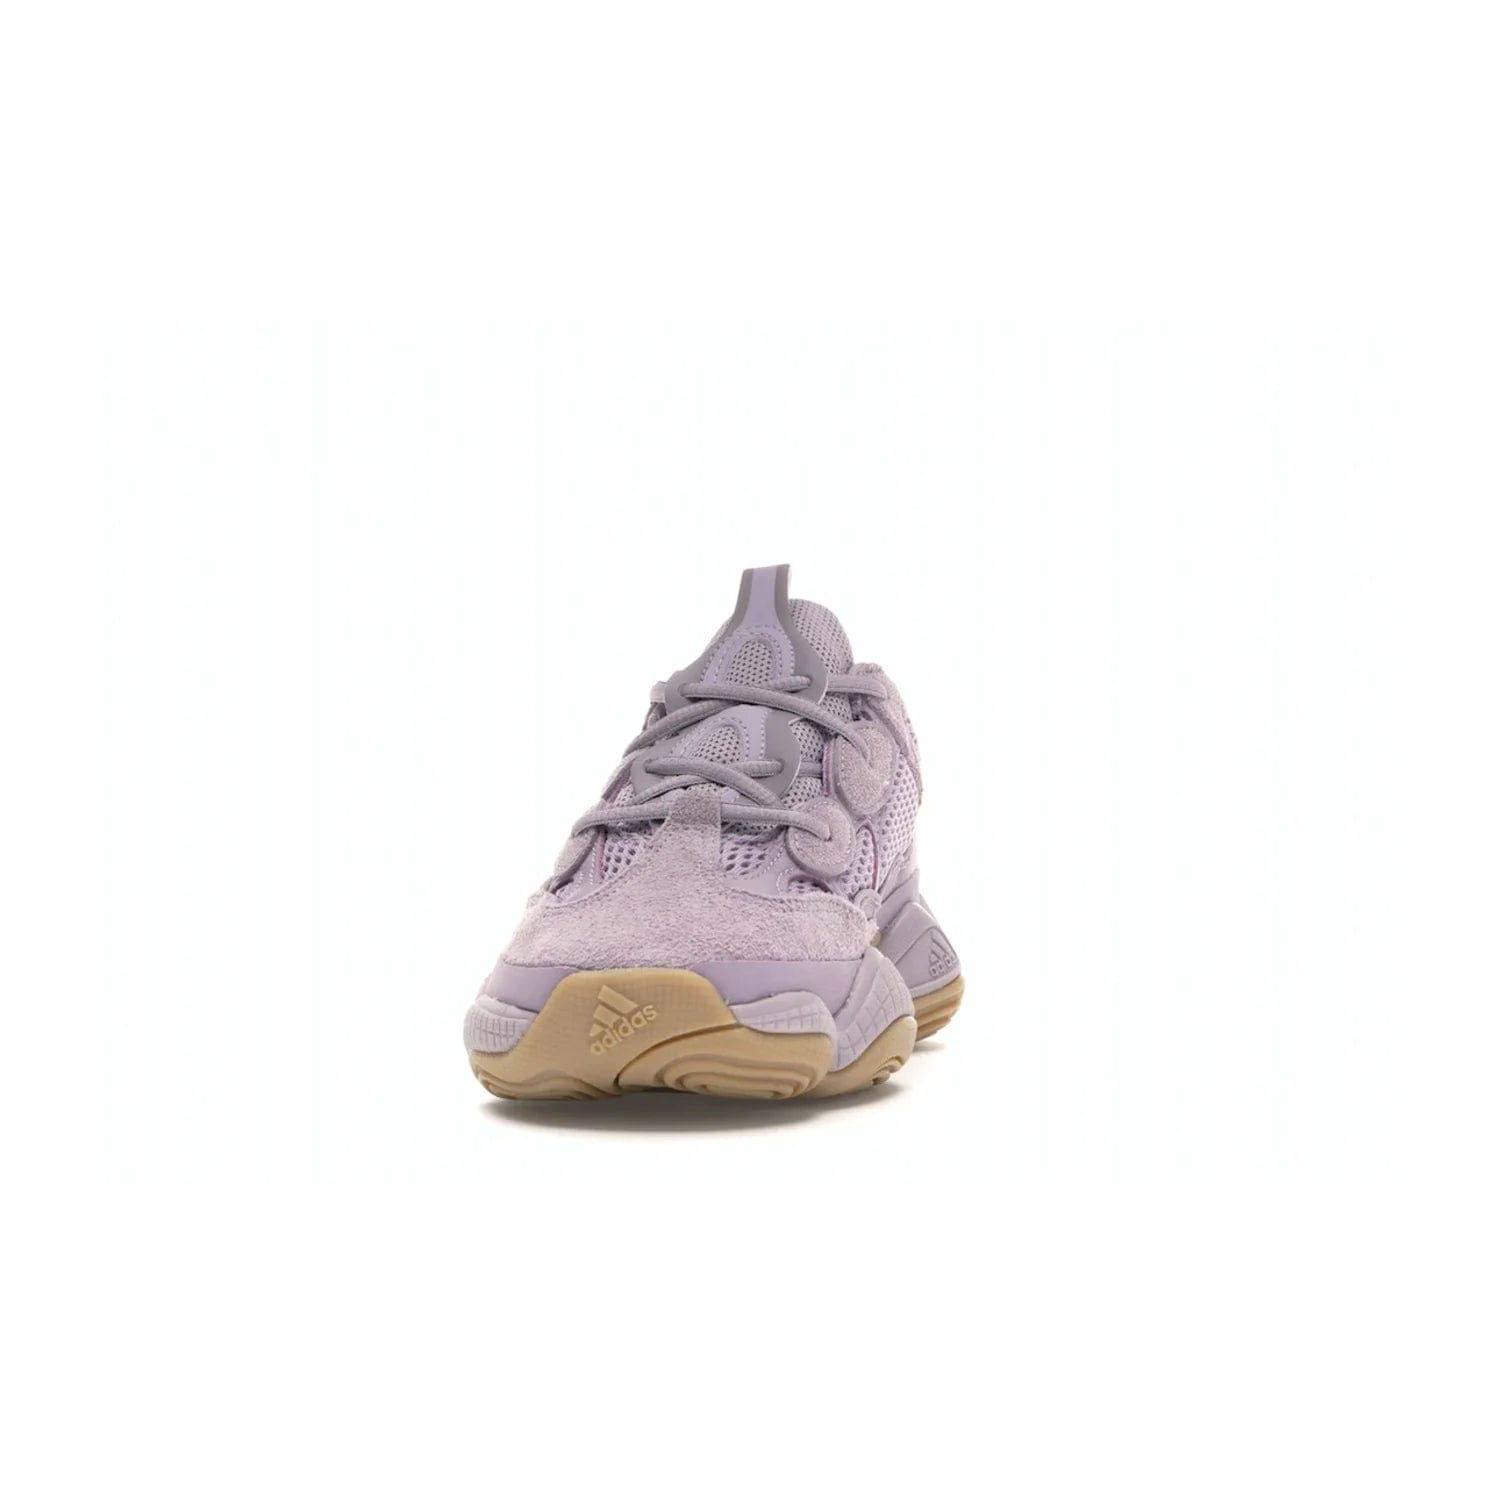 adidas Yeezy 500 Soft Vision - Image 11 - Only at www.BallersClubKickz.com - New adidas Yeezy 500 Soft Vision sneaker featuring a combination of mesh, leather, and suede in a classic Soft Vision colorway. Gum rubber outsole ensures durability and traction. An everyday sneaker that stands out from the crowd.